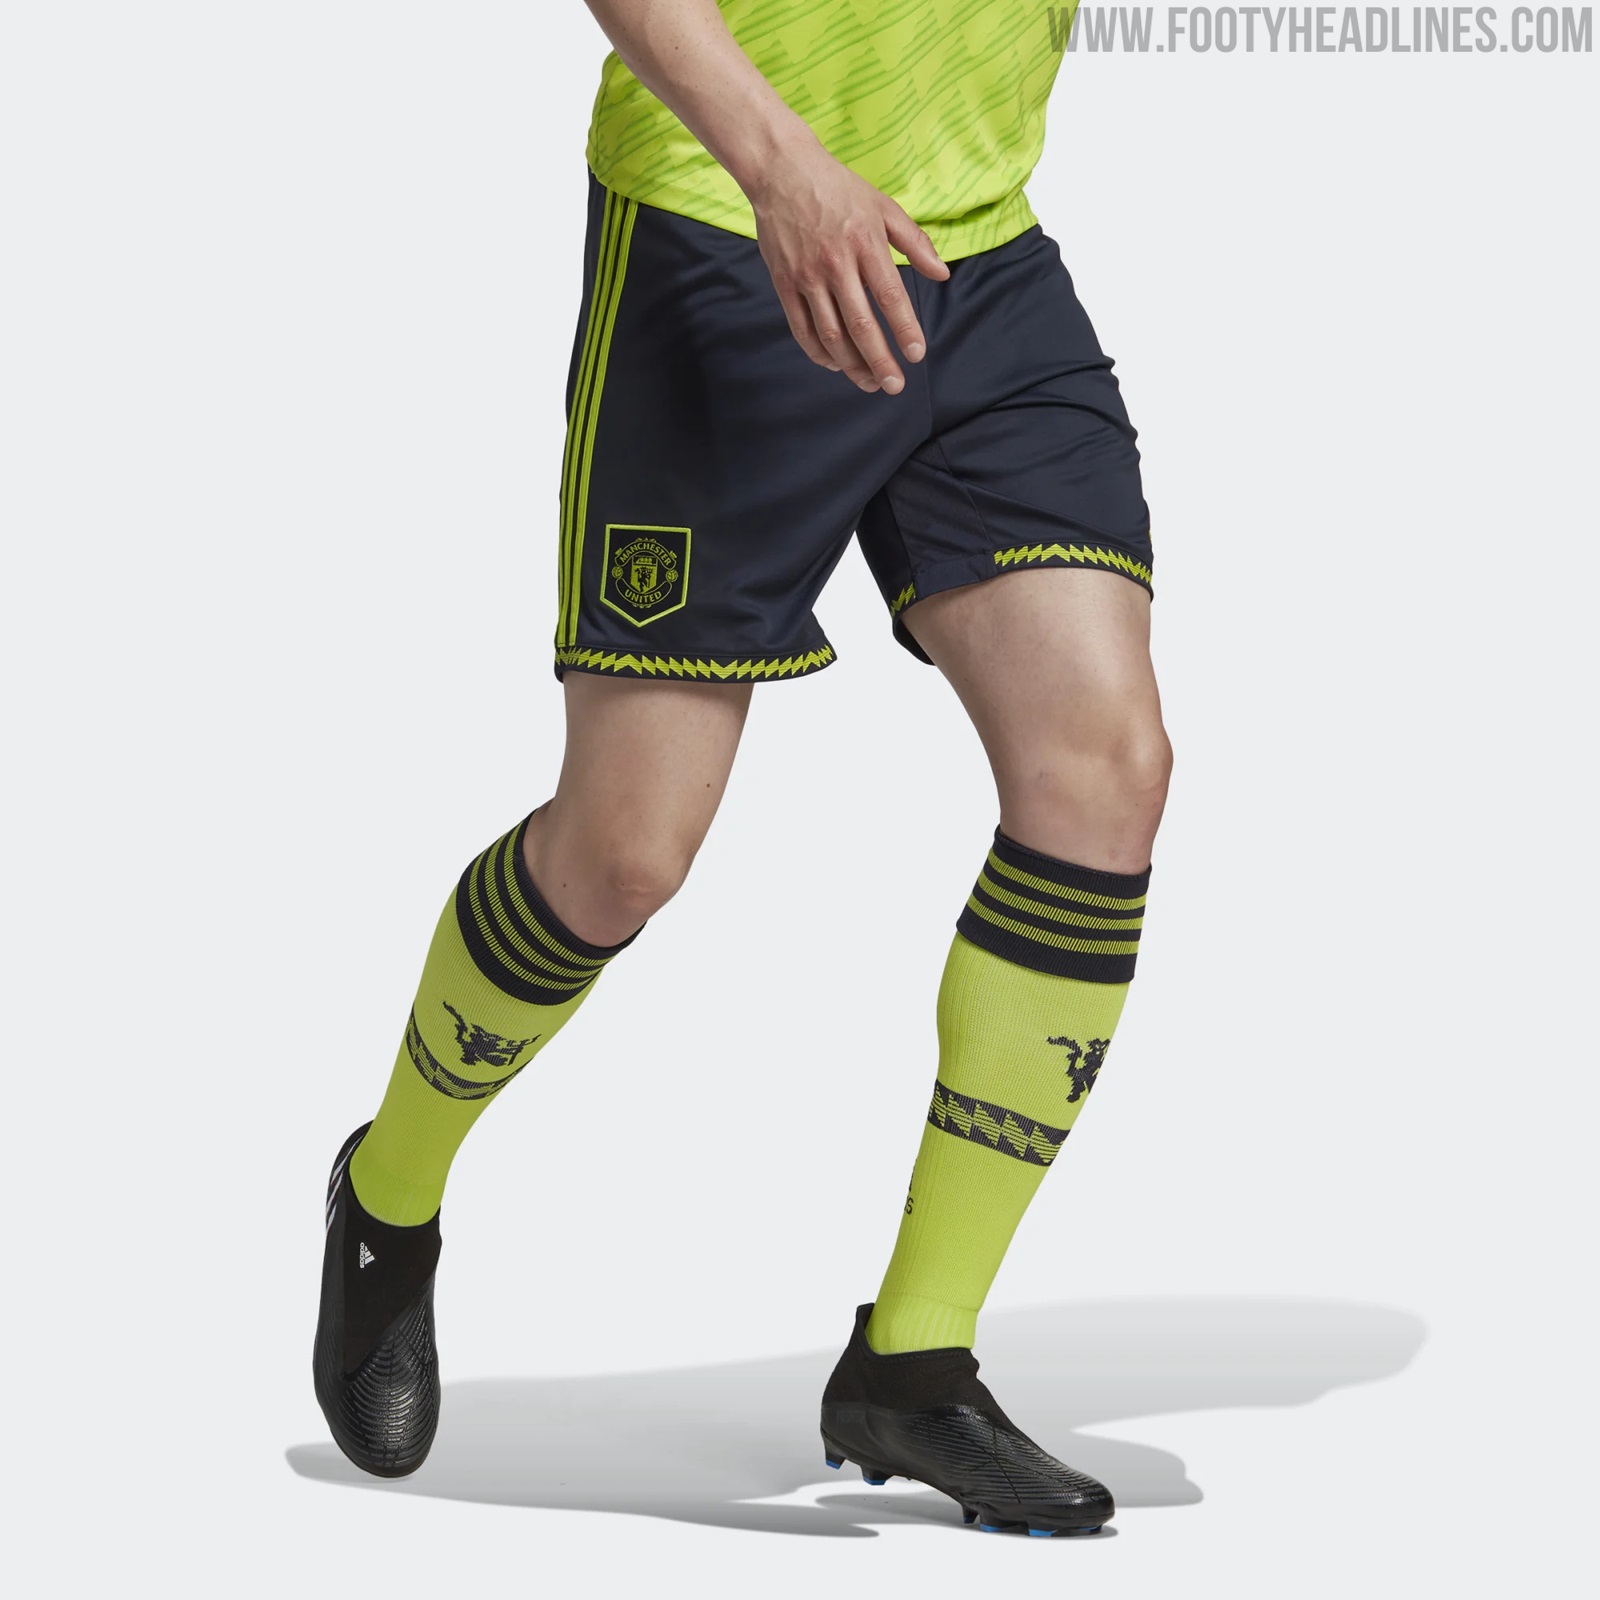 Manchester United 22-23 Third Kit Released - Footy Headlines